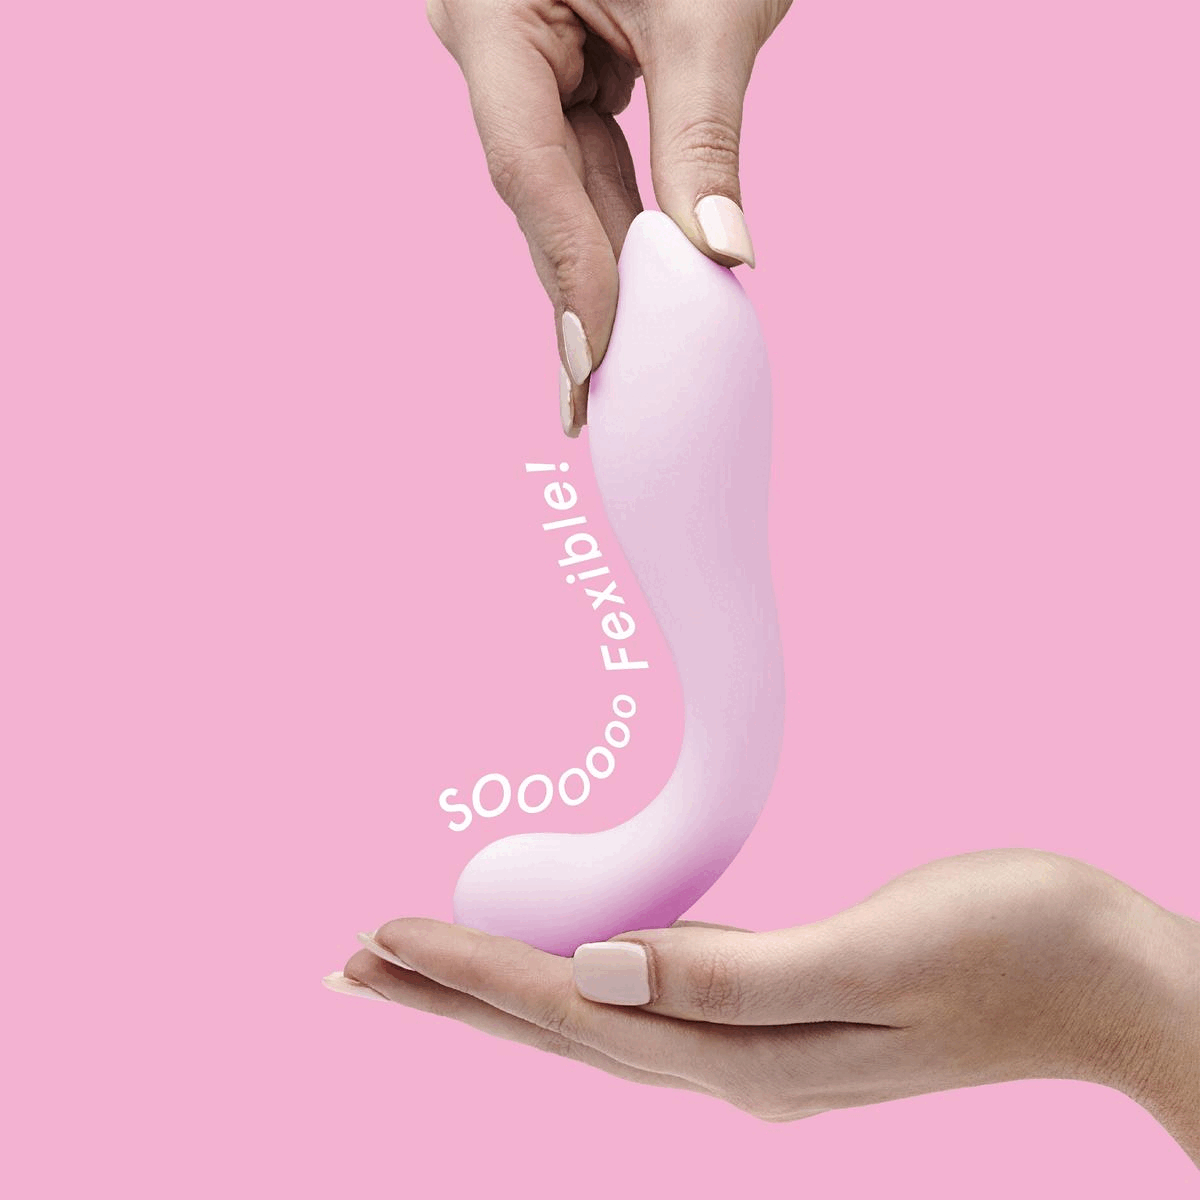 So Flexible. 7 inch discreet dildo. Curved tip for G spot pleasure. Discreet for targeted G spot stimulation.